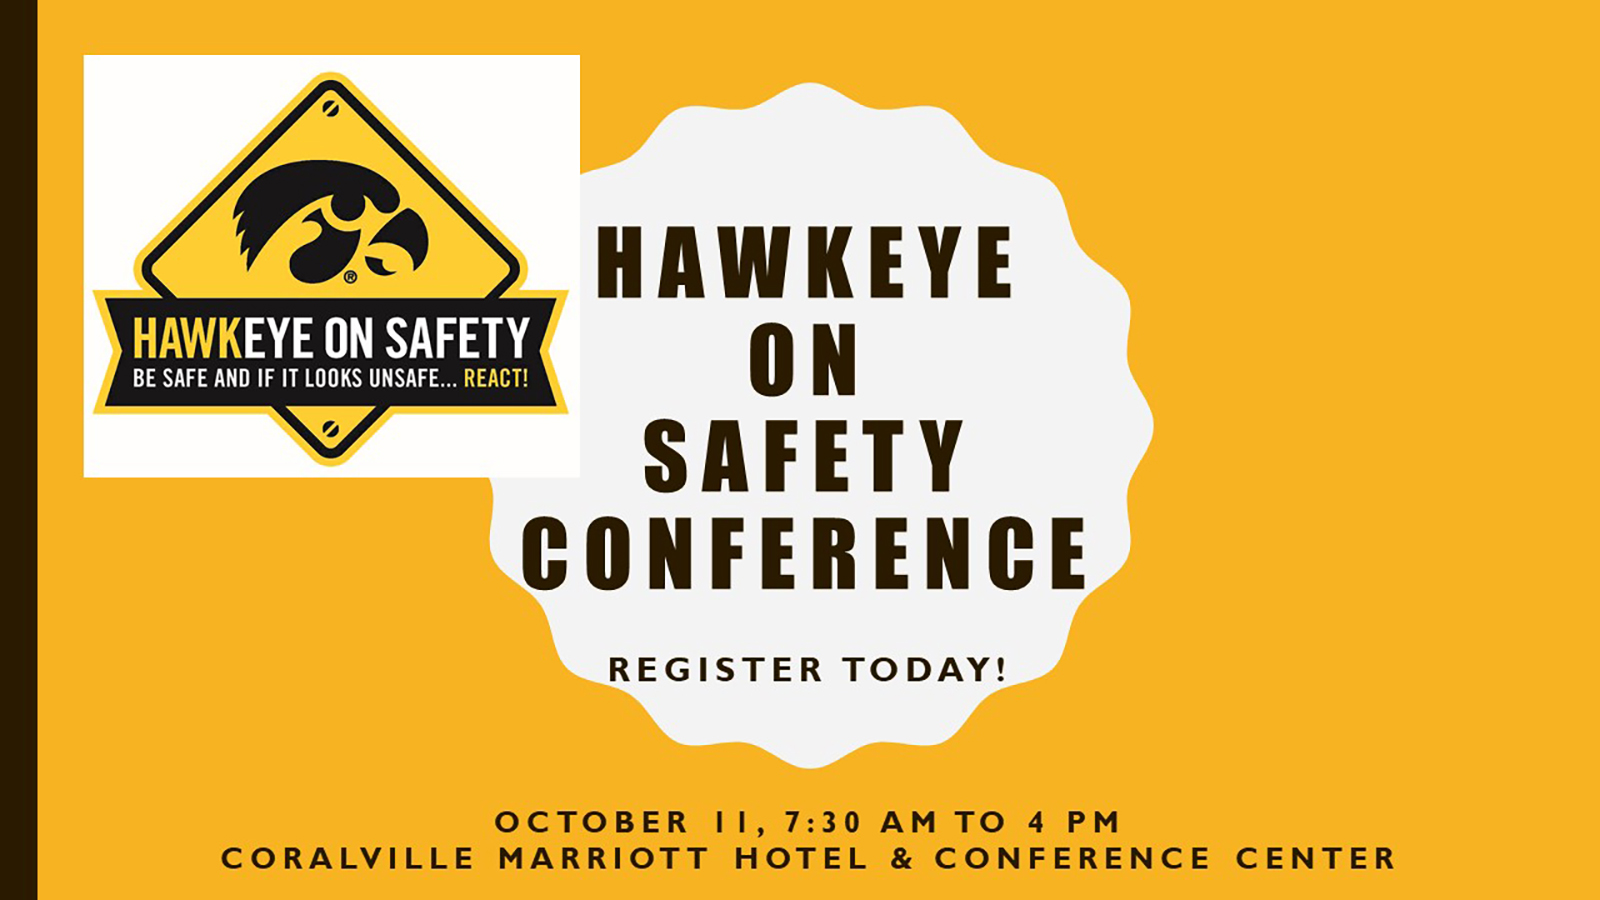 Hawkeye on Safety Conference